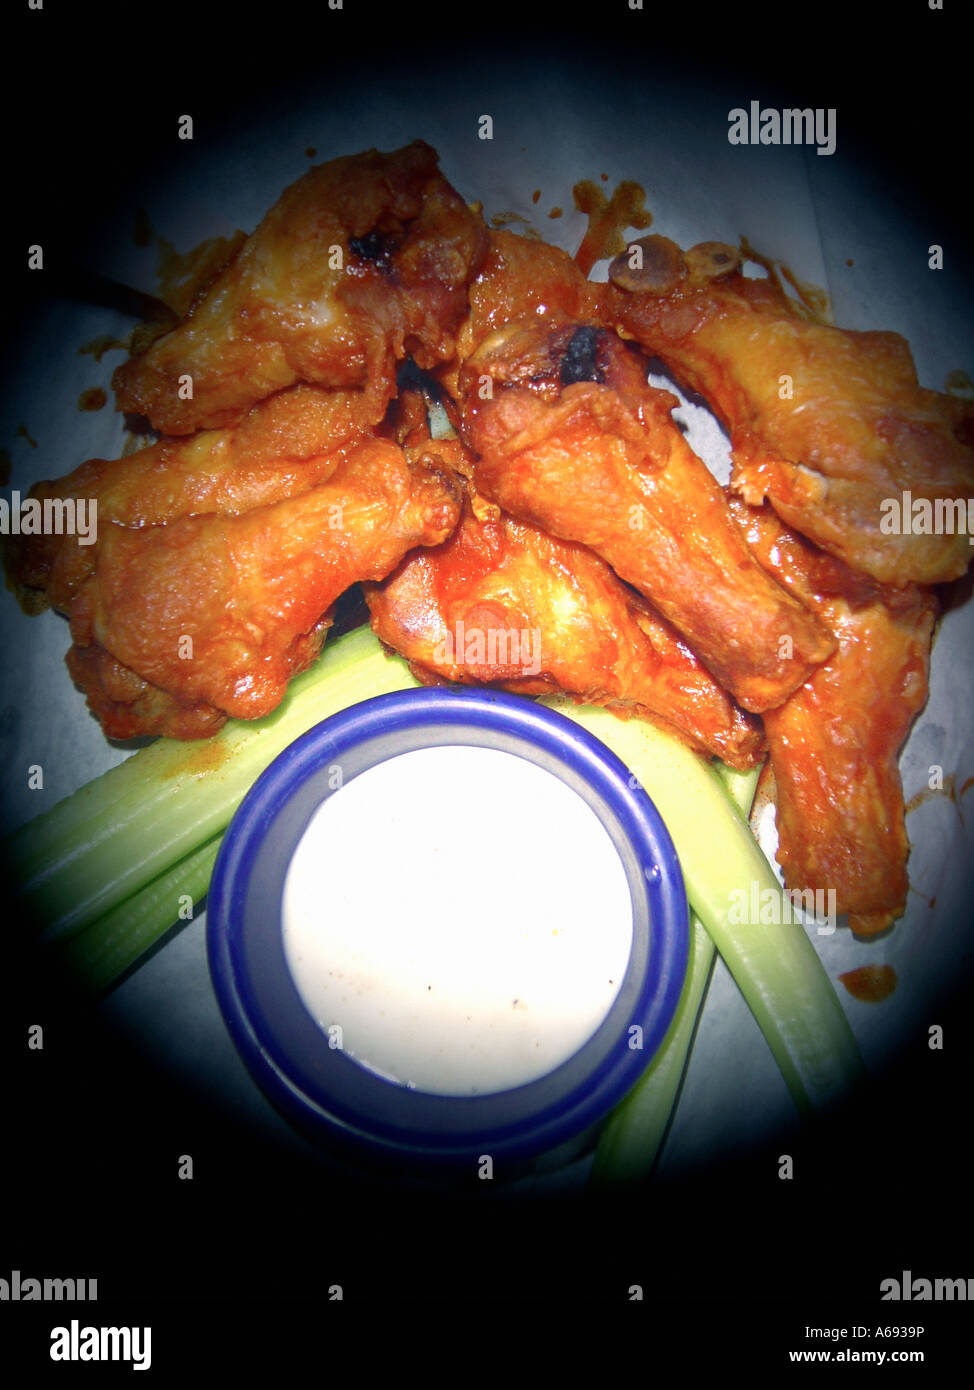 Spot Lit Plate of Hot and Spicy Buffalo Chicken Wings Celery and Bleu Cheese Dressing Viewed From Above Copy Space Stock Photo